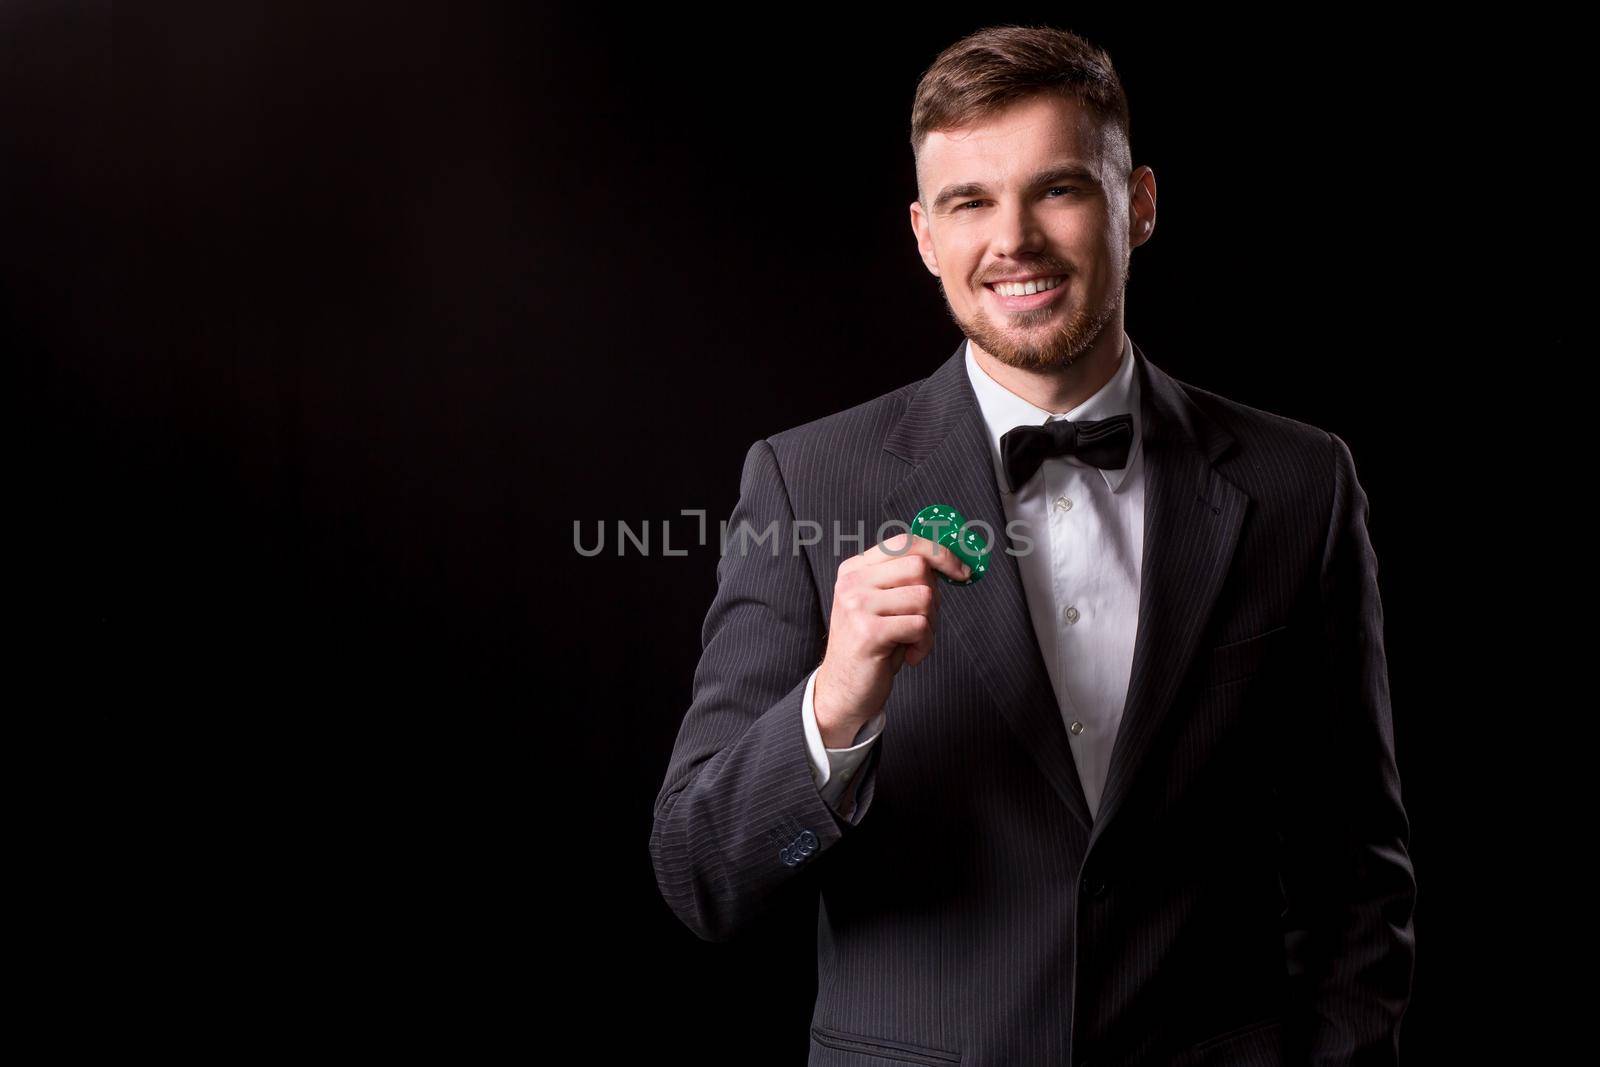 man in a suit posing with chips for gambling on black background